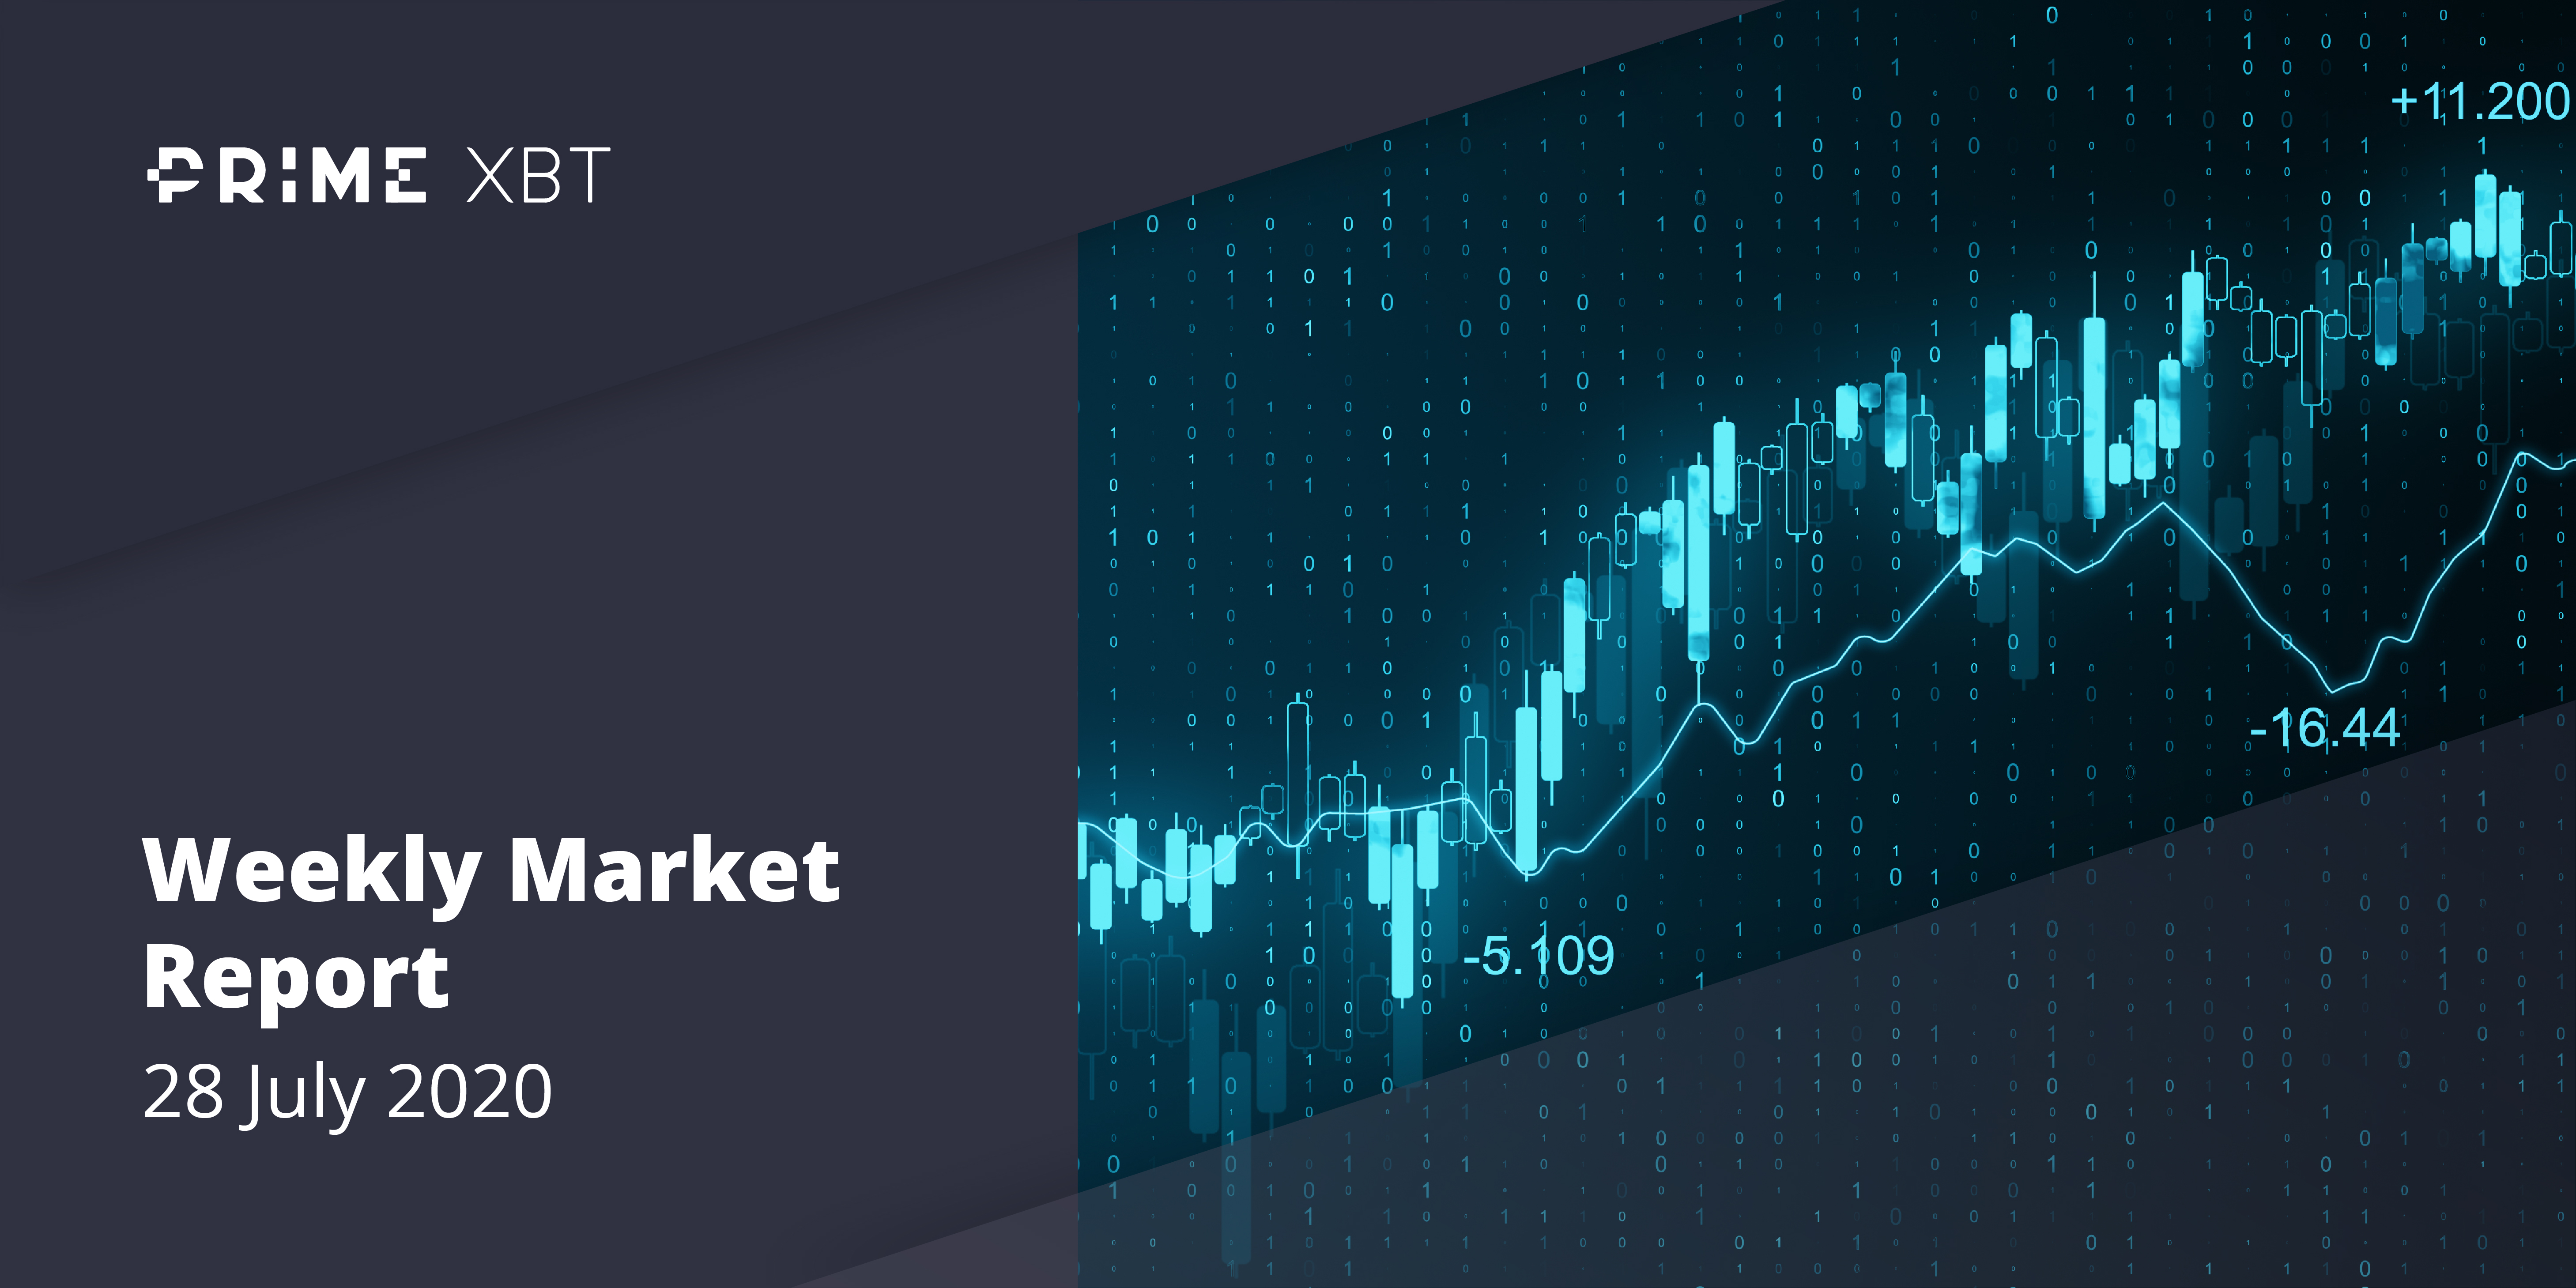 Crypto Market Report: Bulls are Back as Bitcoin Takes off, Ethereum Follows Close Behind in Altcoin Rally - 28.07.20